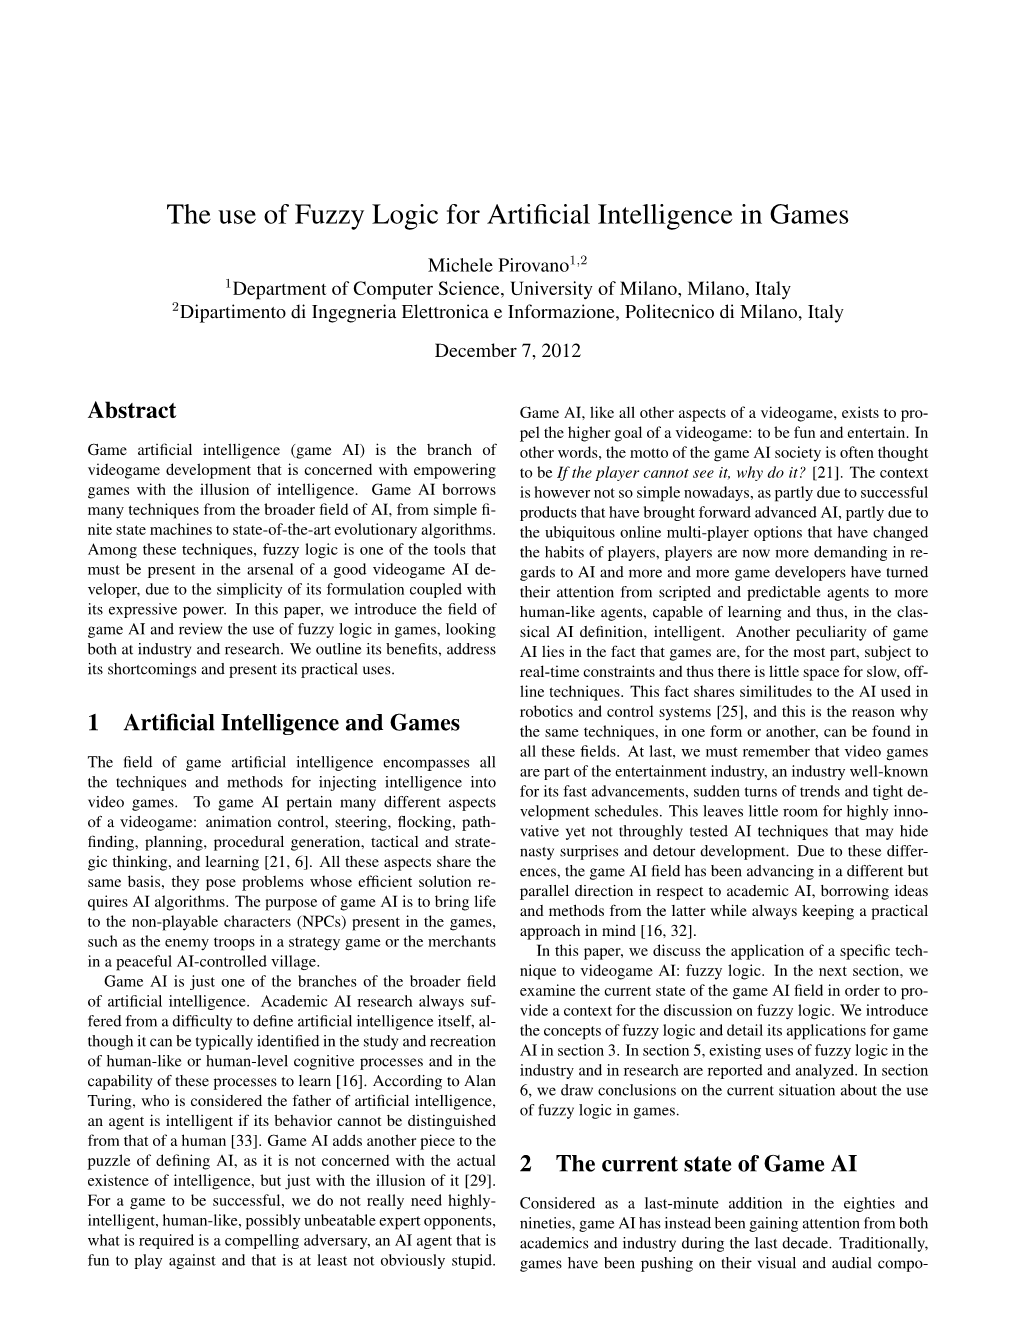 The Use of Fuzzy Logic for Artificial Intelligence in Games